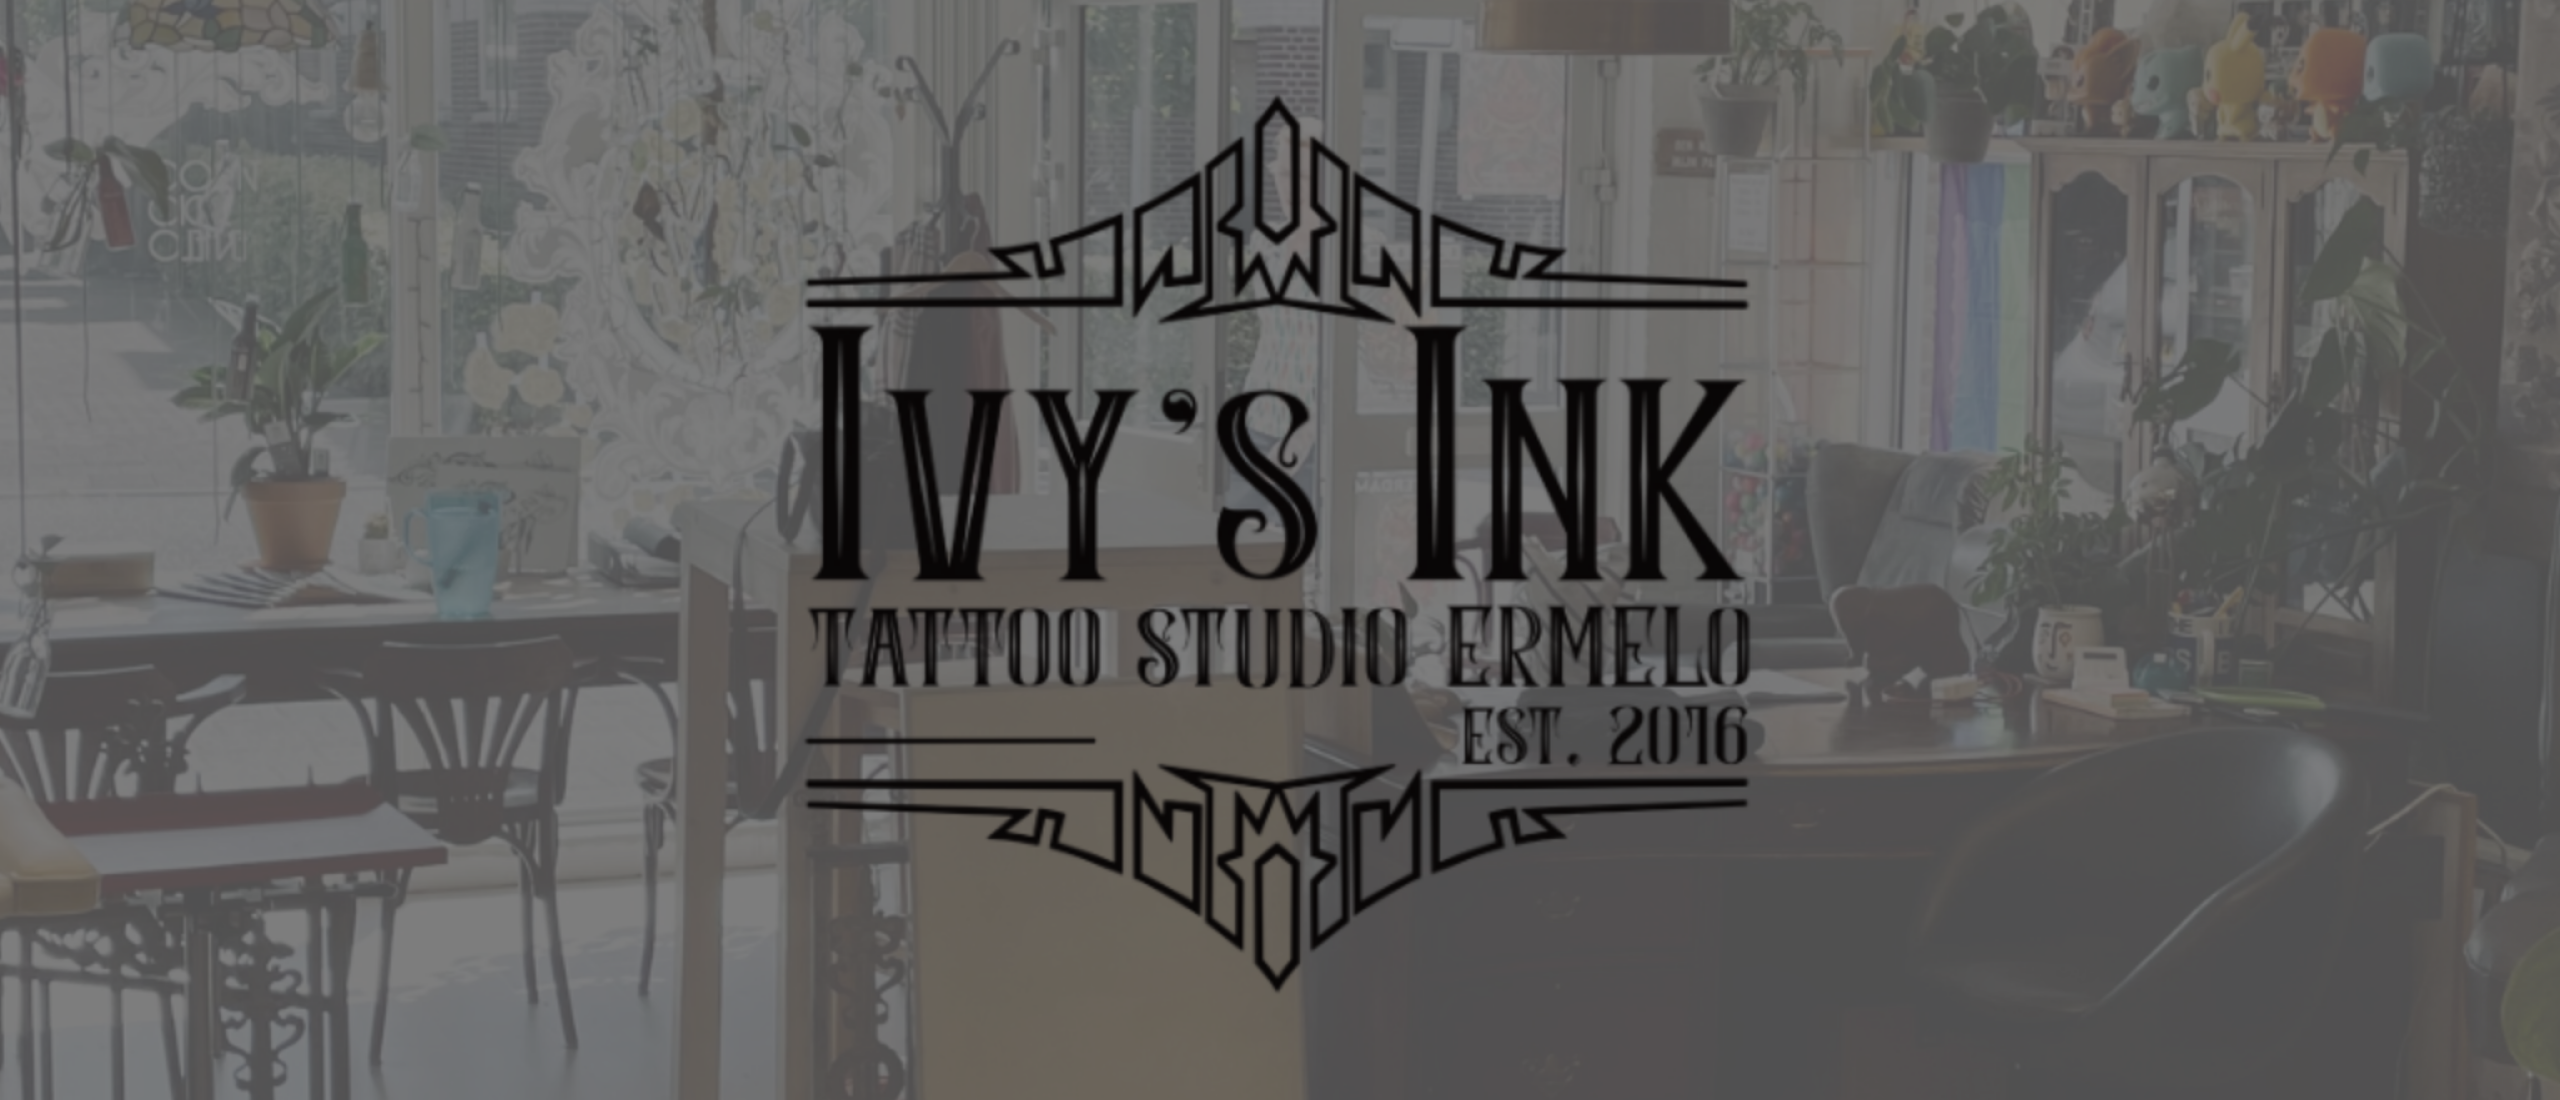 Tattoo shop Ermelo | Ivy's Ink